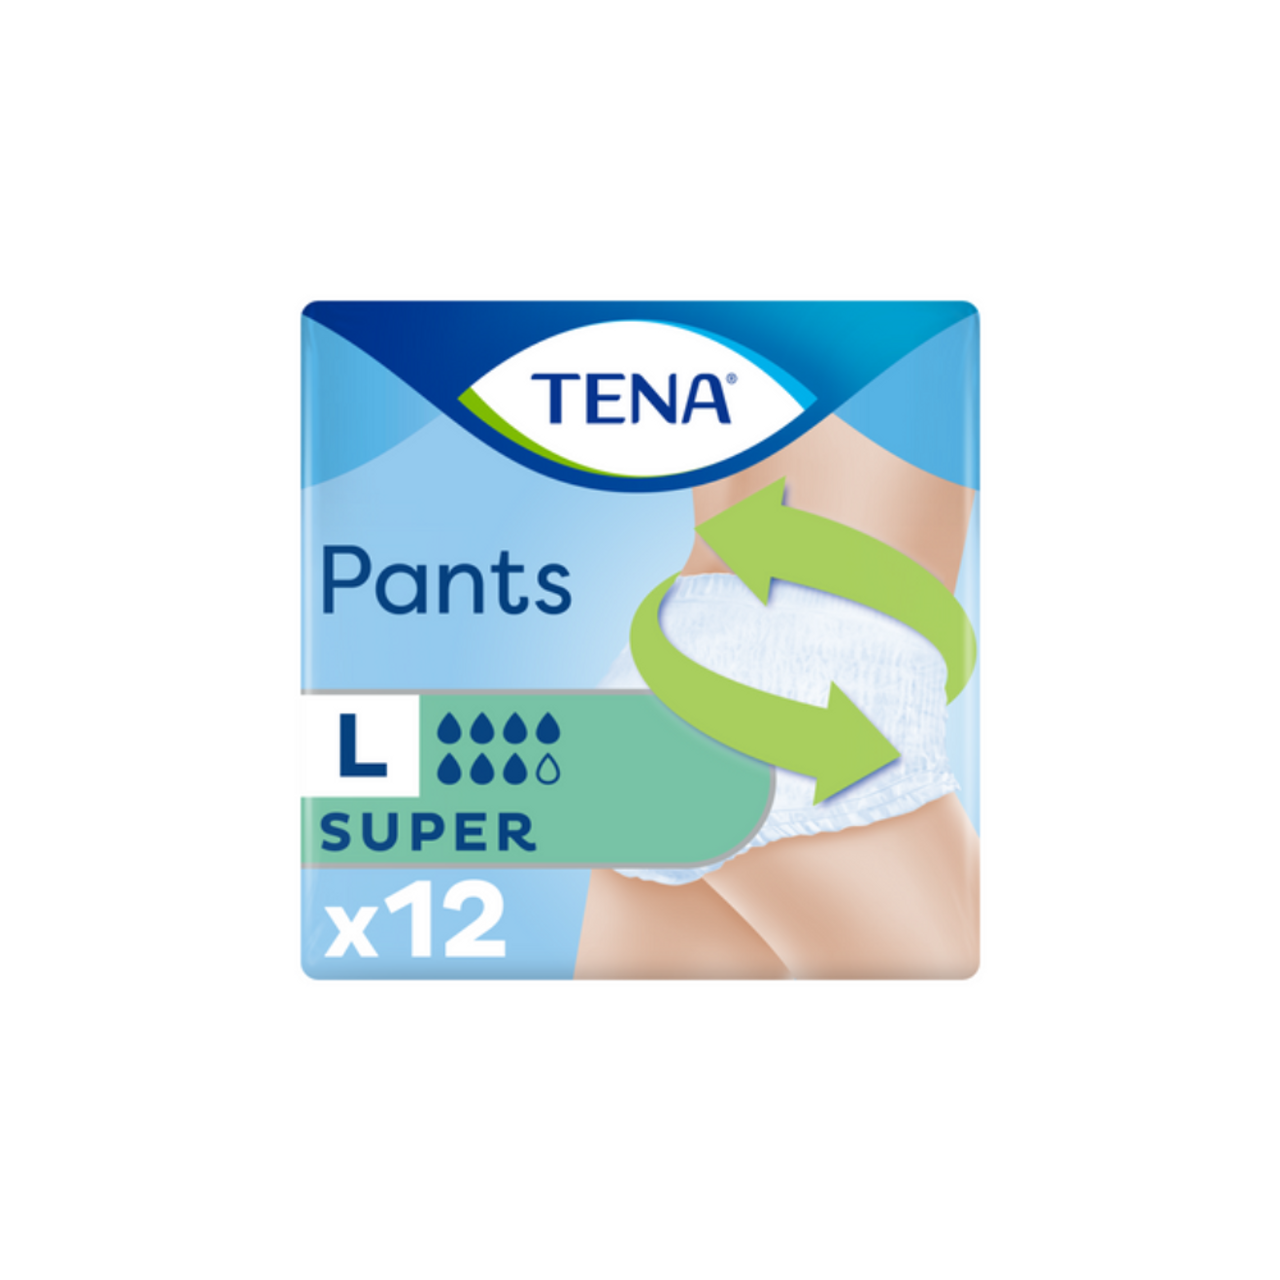 TENA Incontinence Pants Super Large Size 12 pack